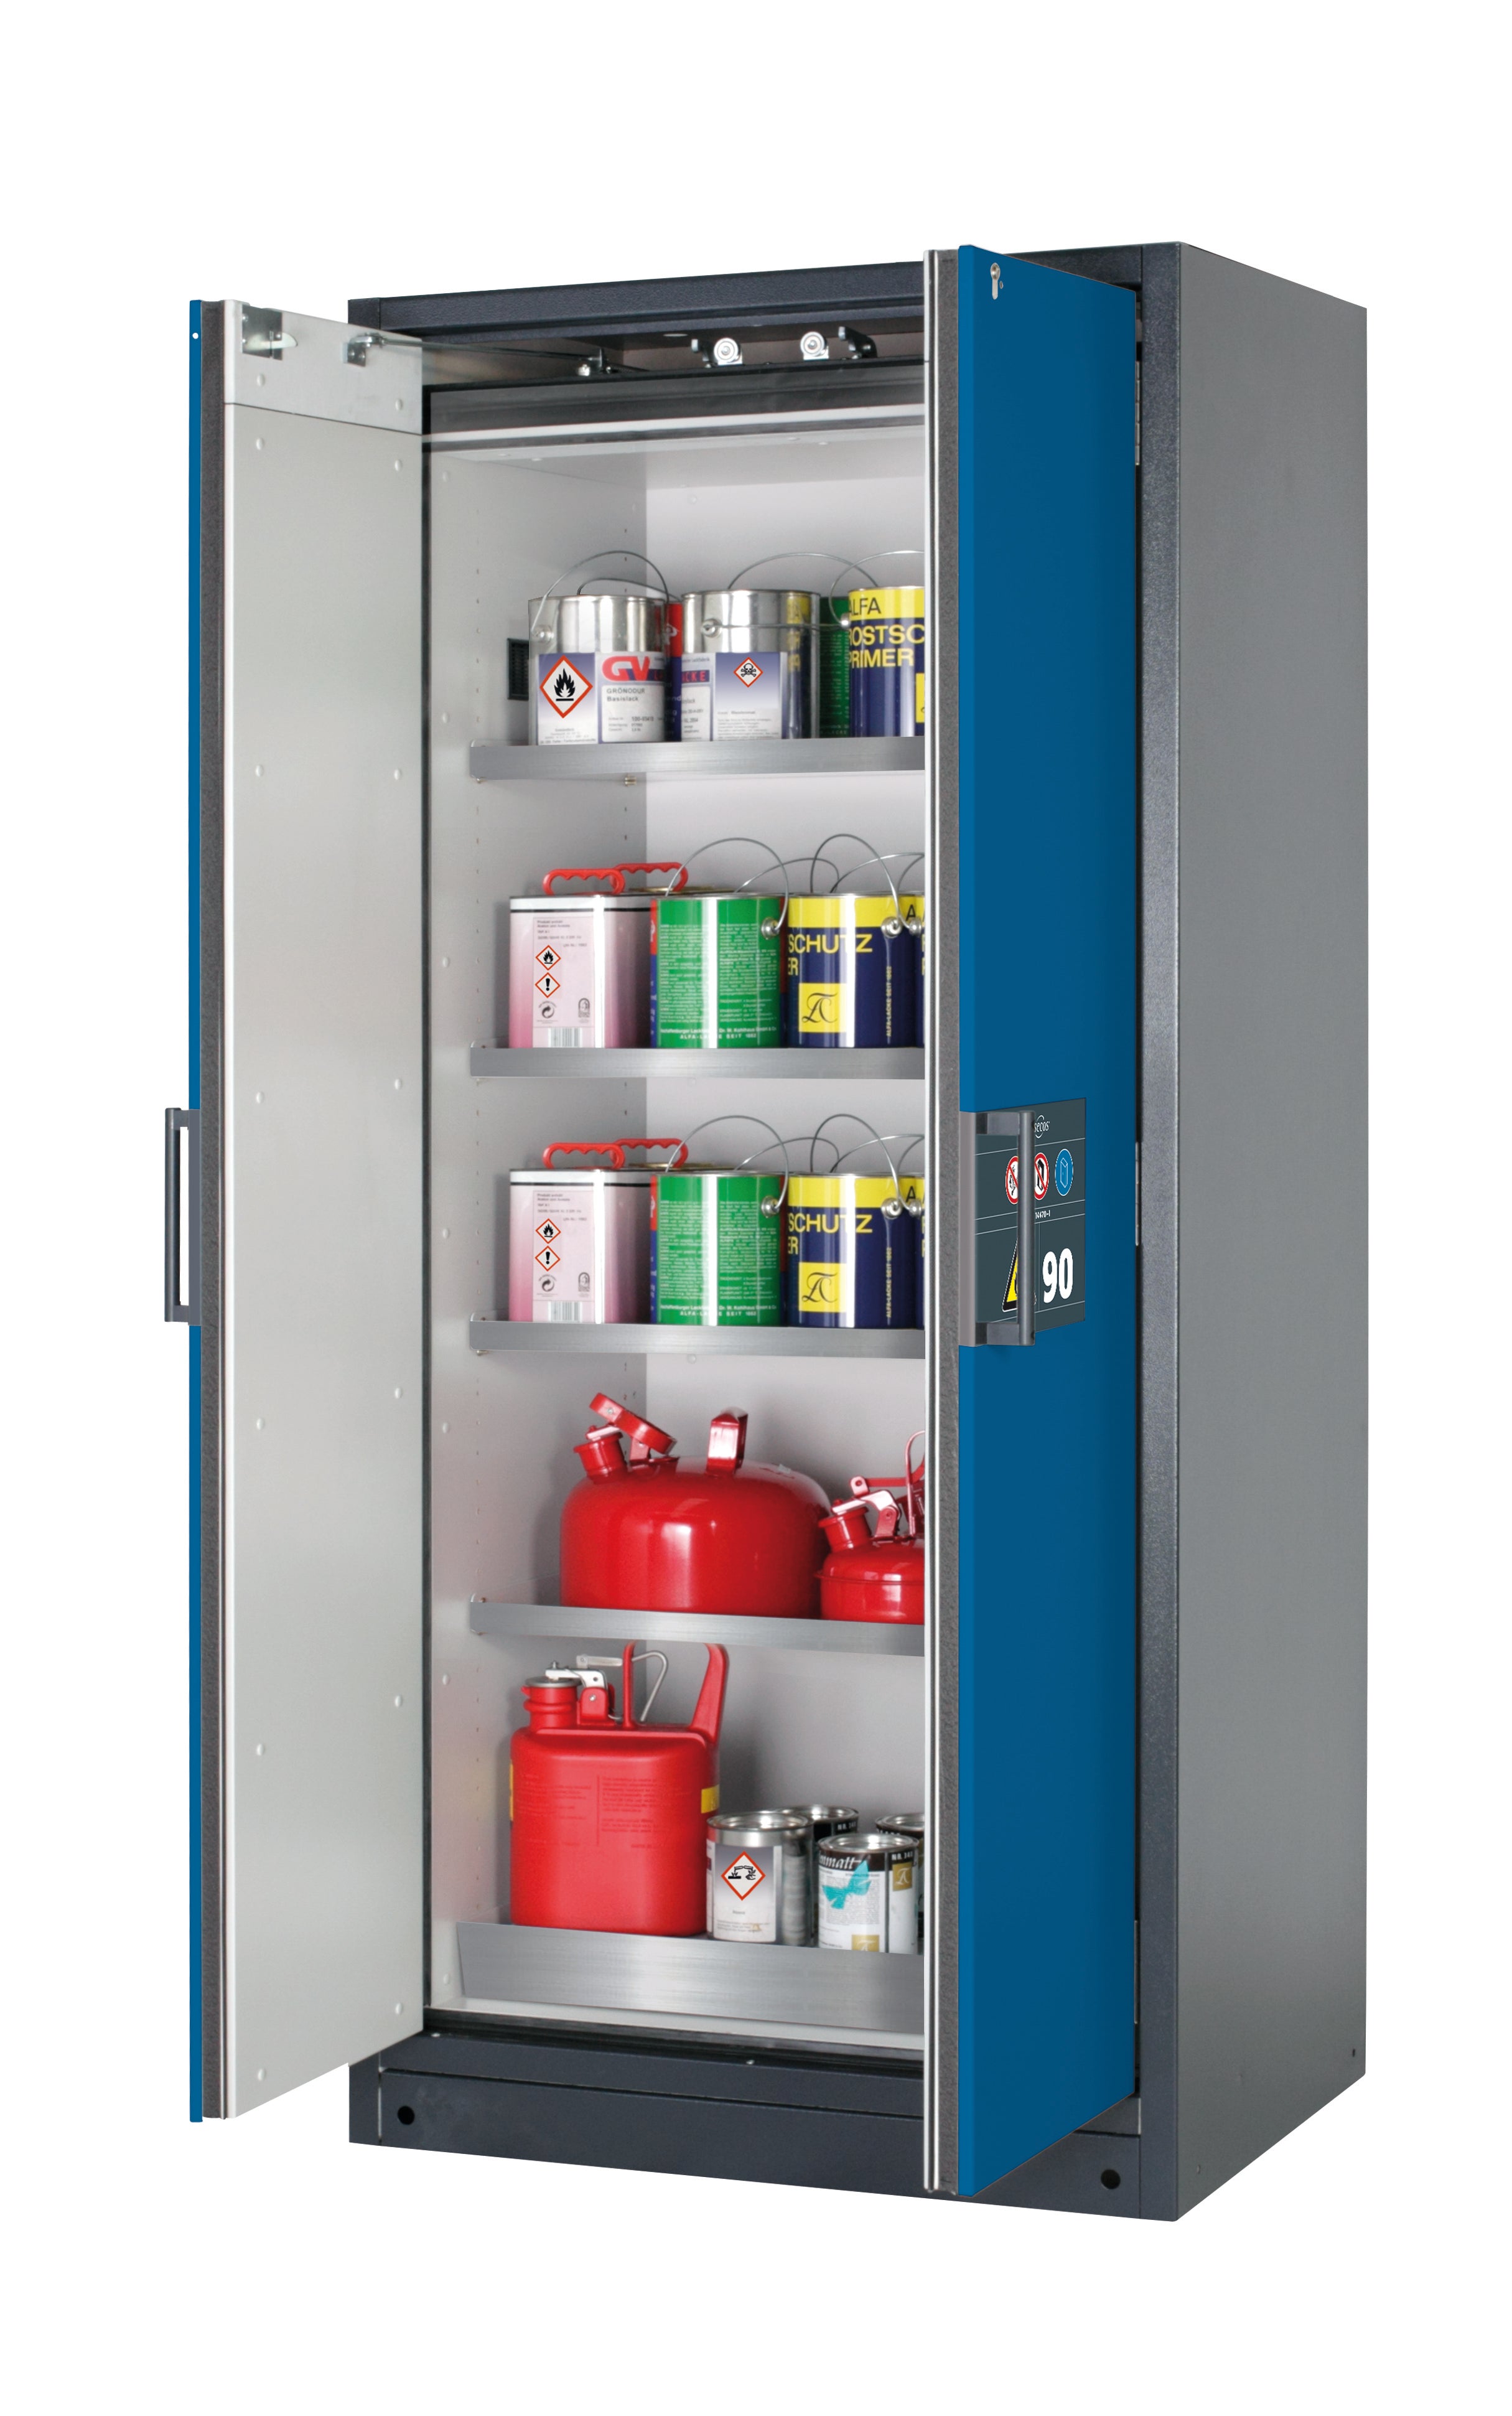 Type 90 safety storage cabinet Q-CLASSIC-90 model Q90.195.090 in gentian blue RAL 5010 with 4x shelf standard (stainless steel 1.4301),